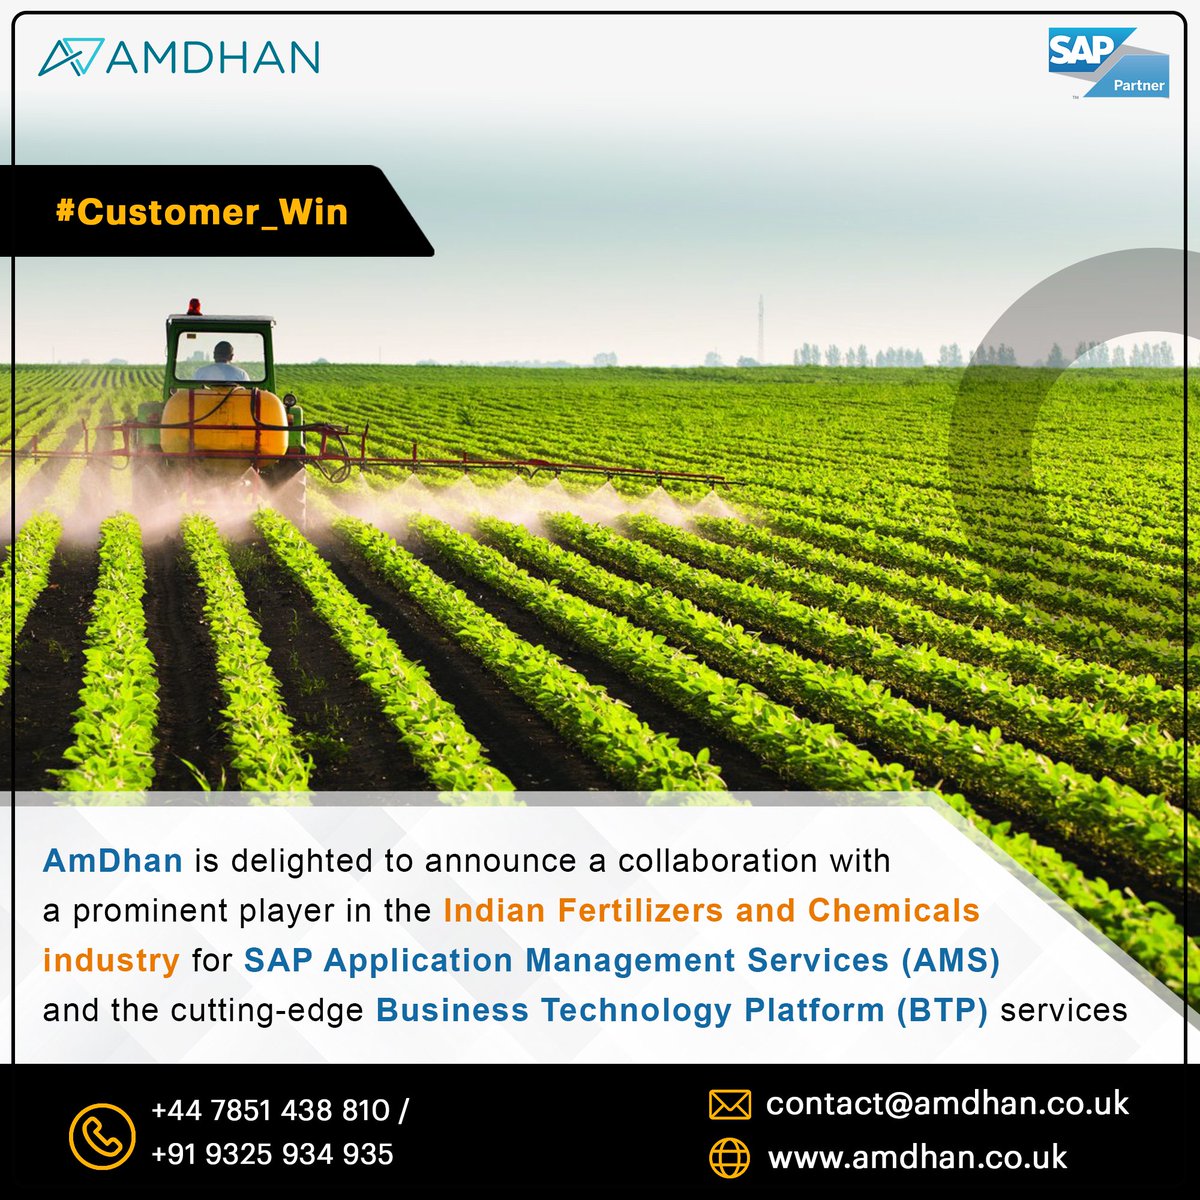 In this transformative alliance, we are set to provide our client with #SAP Application Management Services (AMS) & cutting-edge Business Technology Platform (BTP) services.

🌐amdhan.co.uk

#SAPAMS #SAPBTP #ariba #sapariba #sapsupport #success #CustomerWin #AmDhan